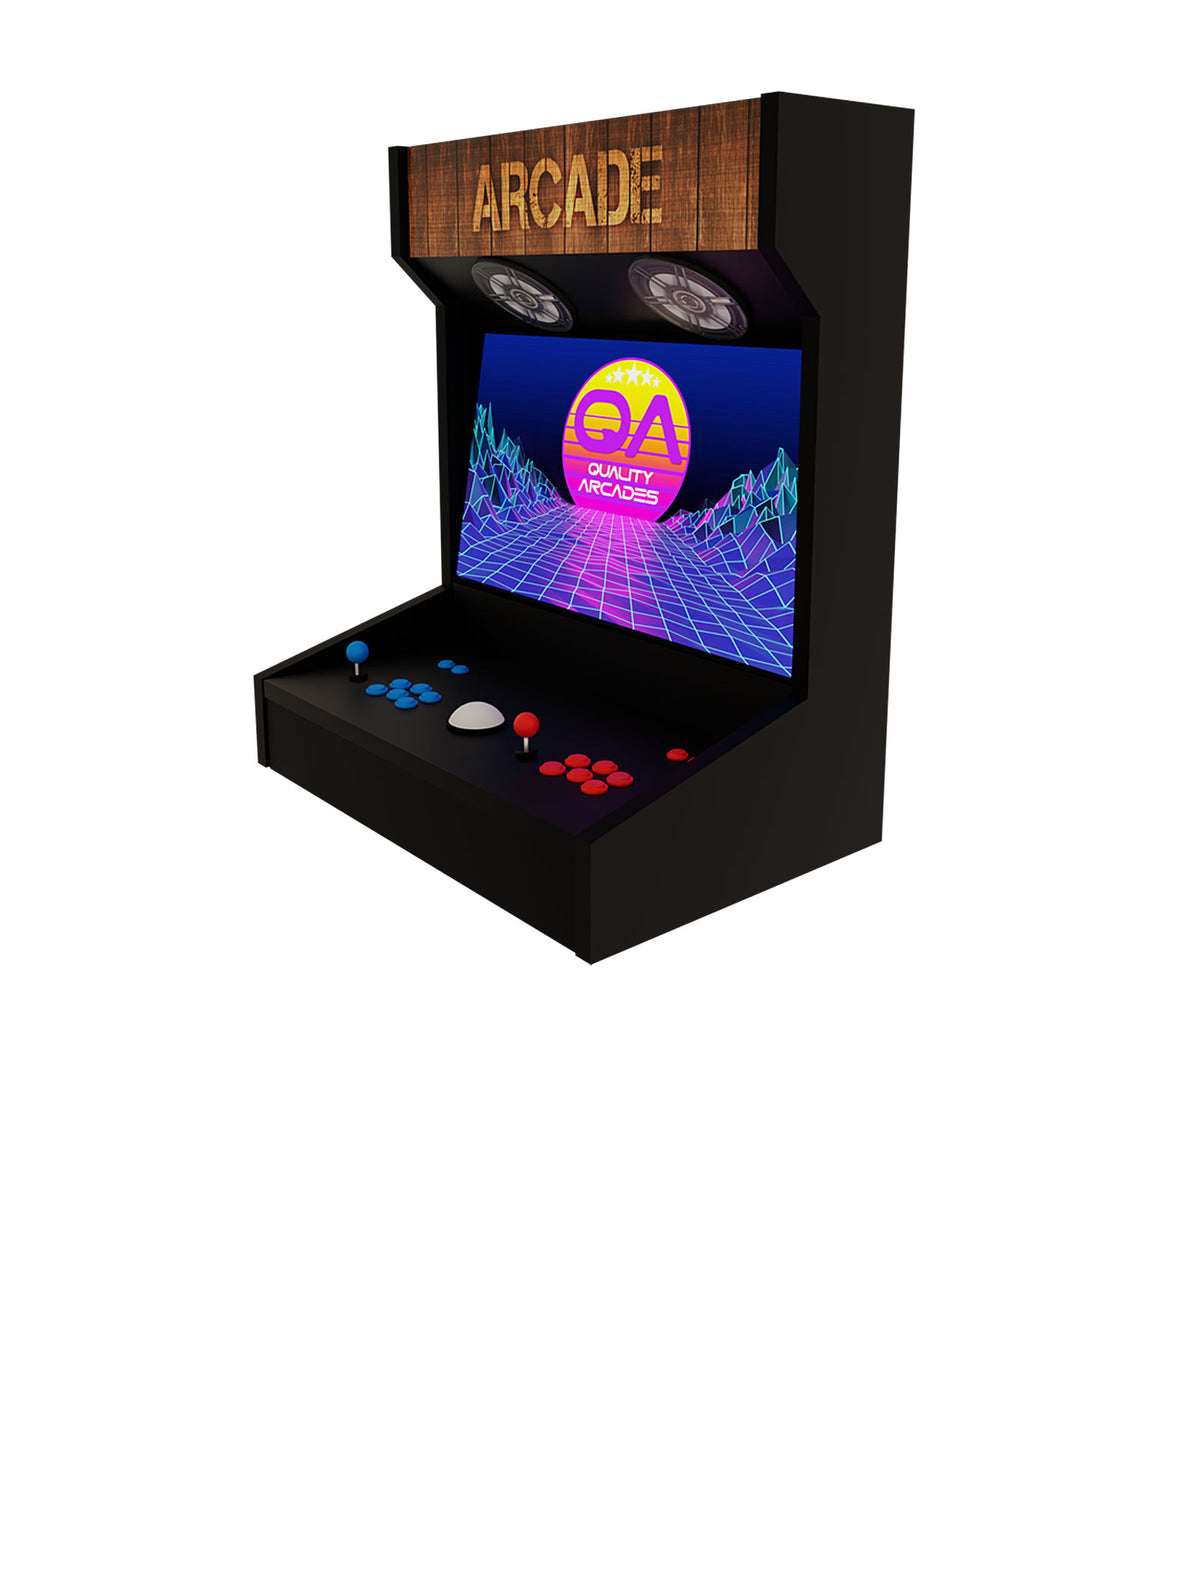 2 Player Wall Mount Arcade Machine - Play over 17,568 Classic Games!